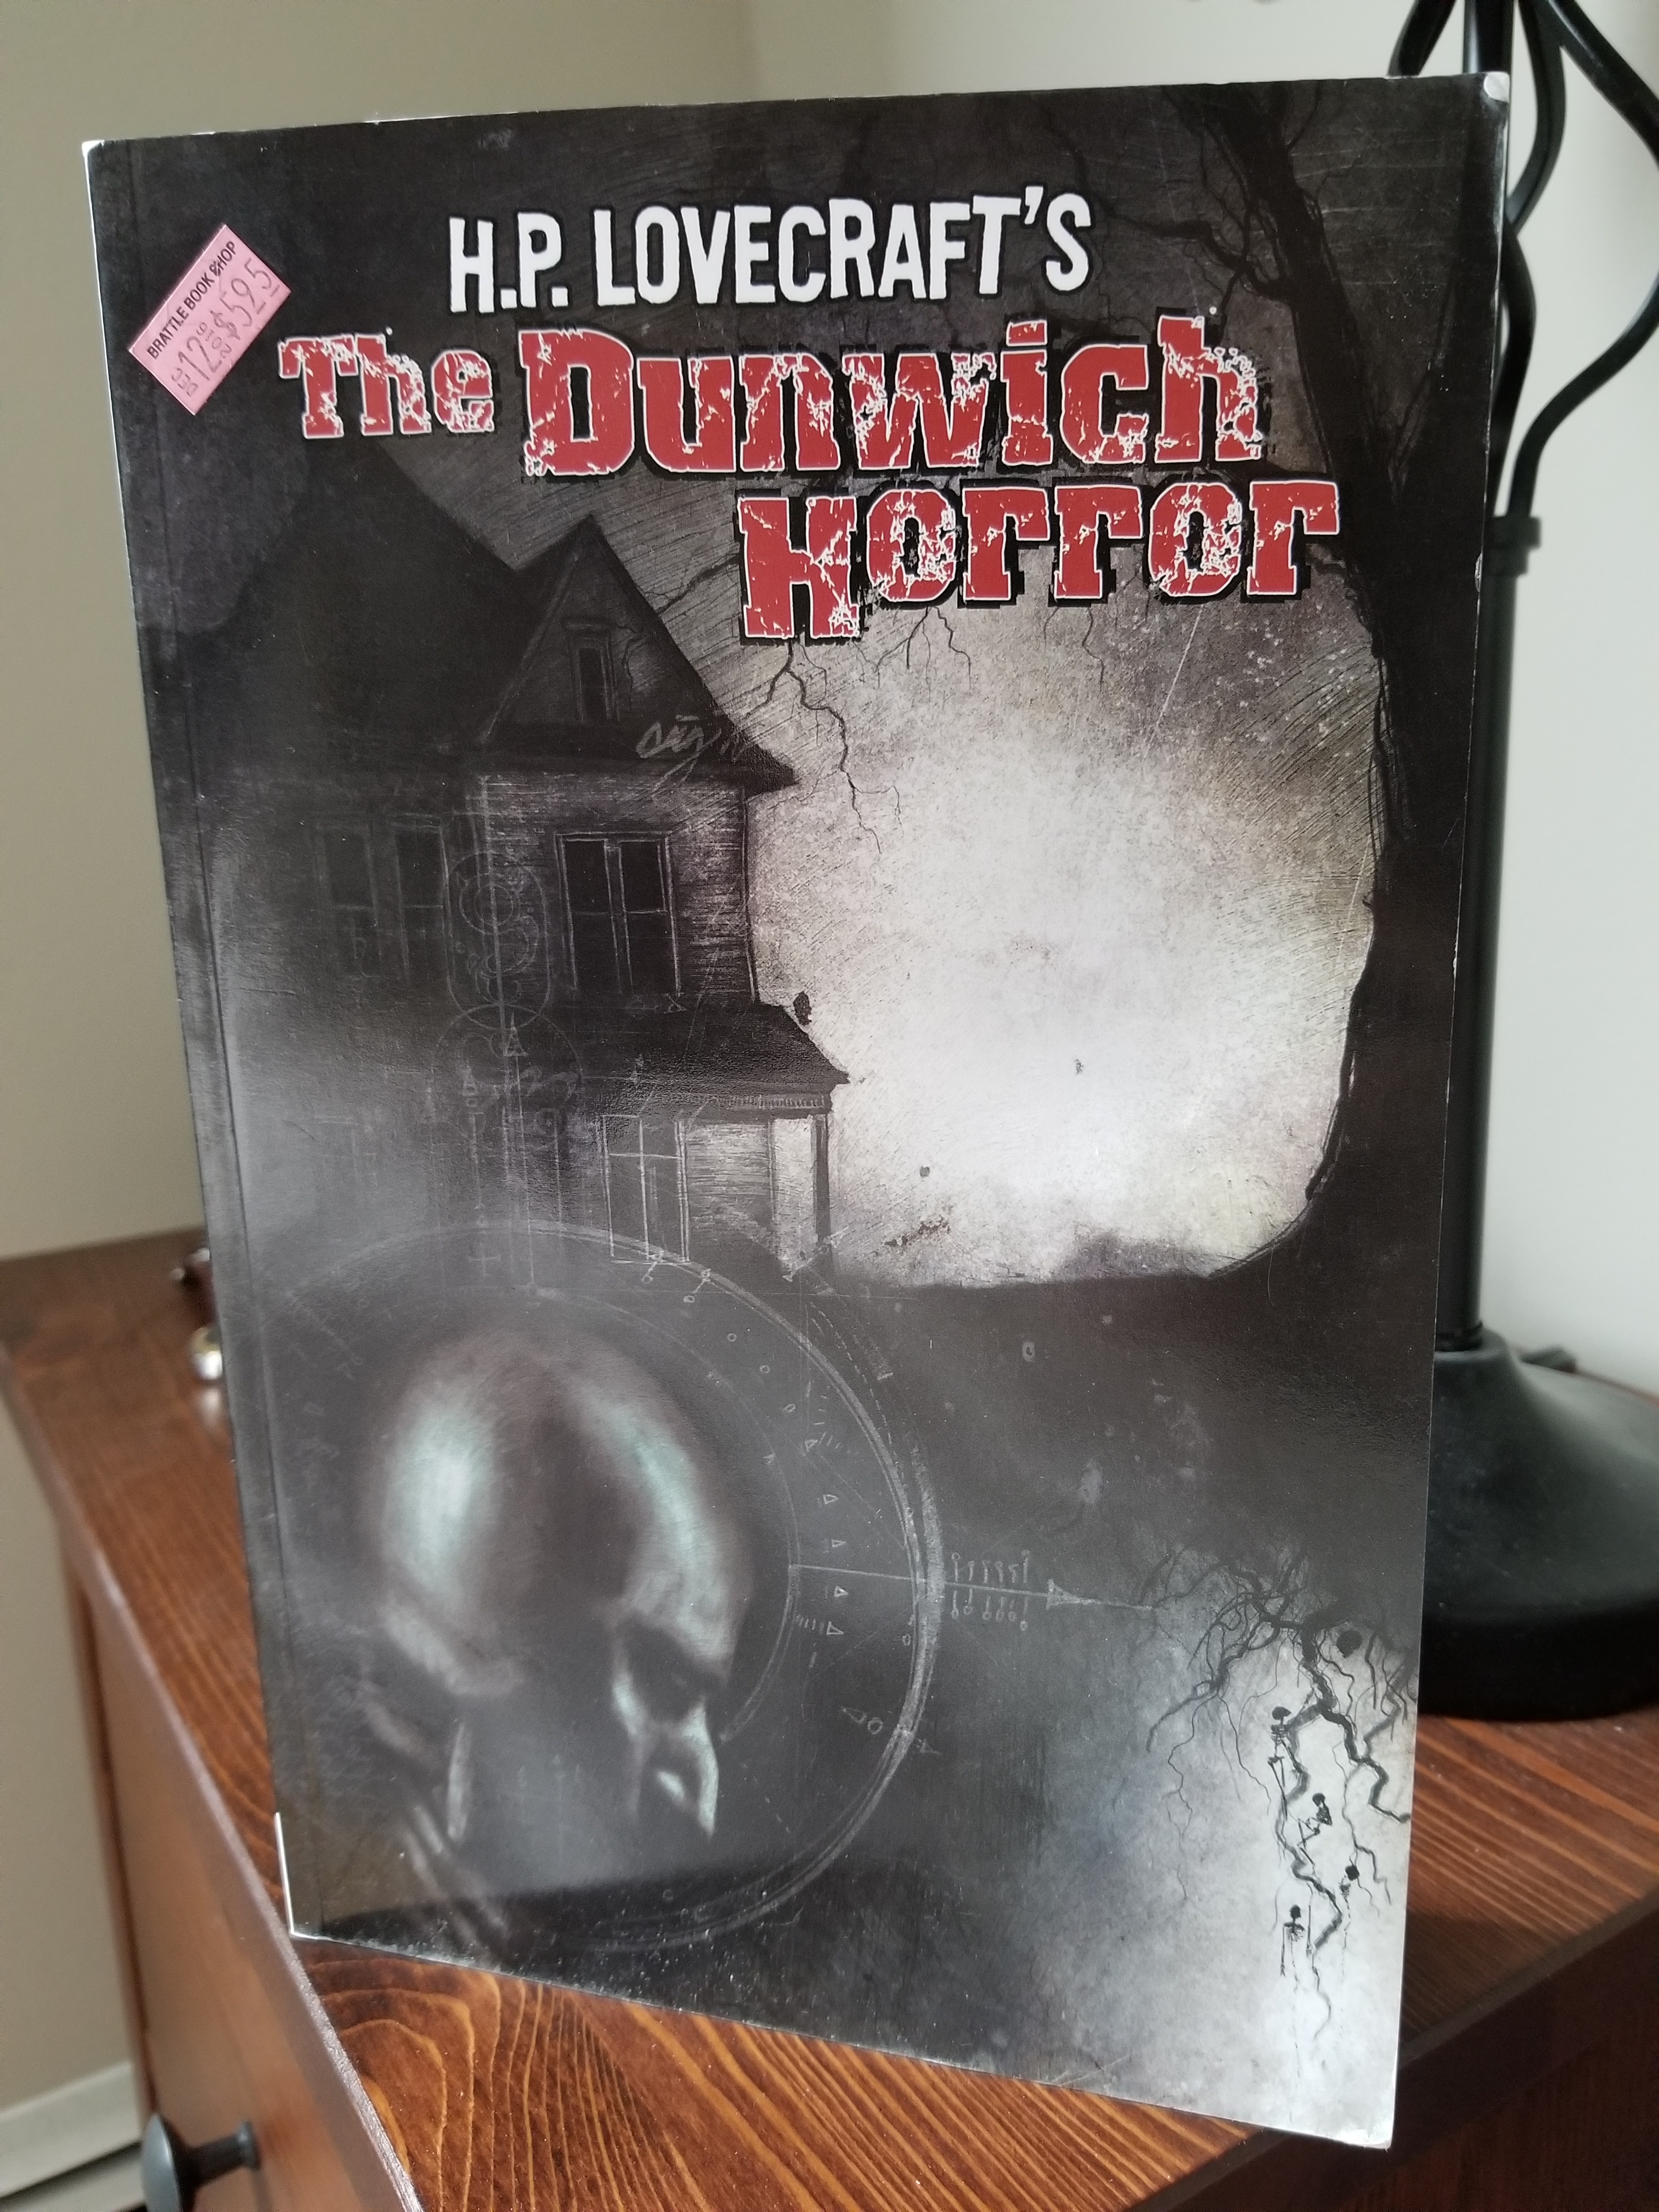 [Image is a graphic novel titled H.P. Lovecraft's The Dunwich Horror]